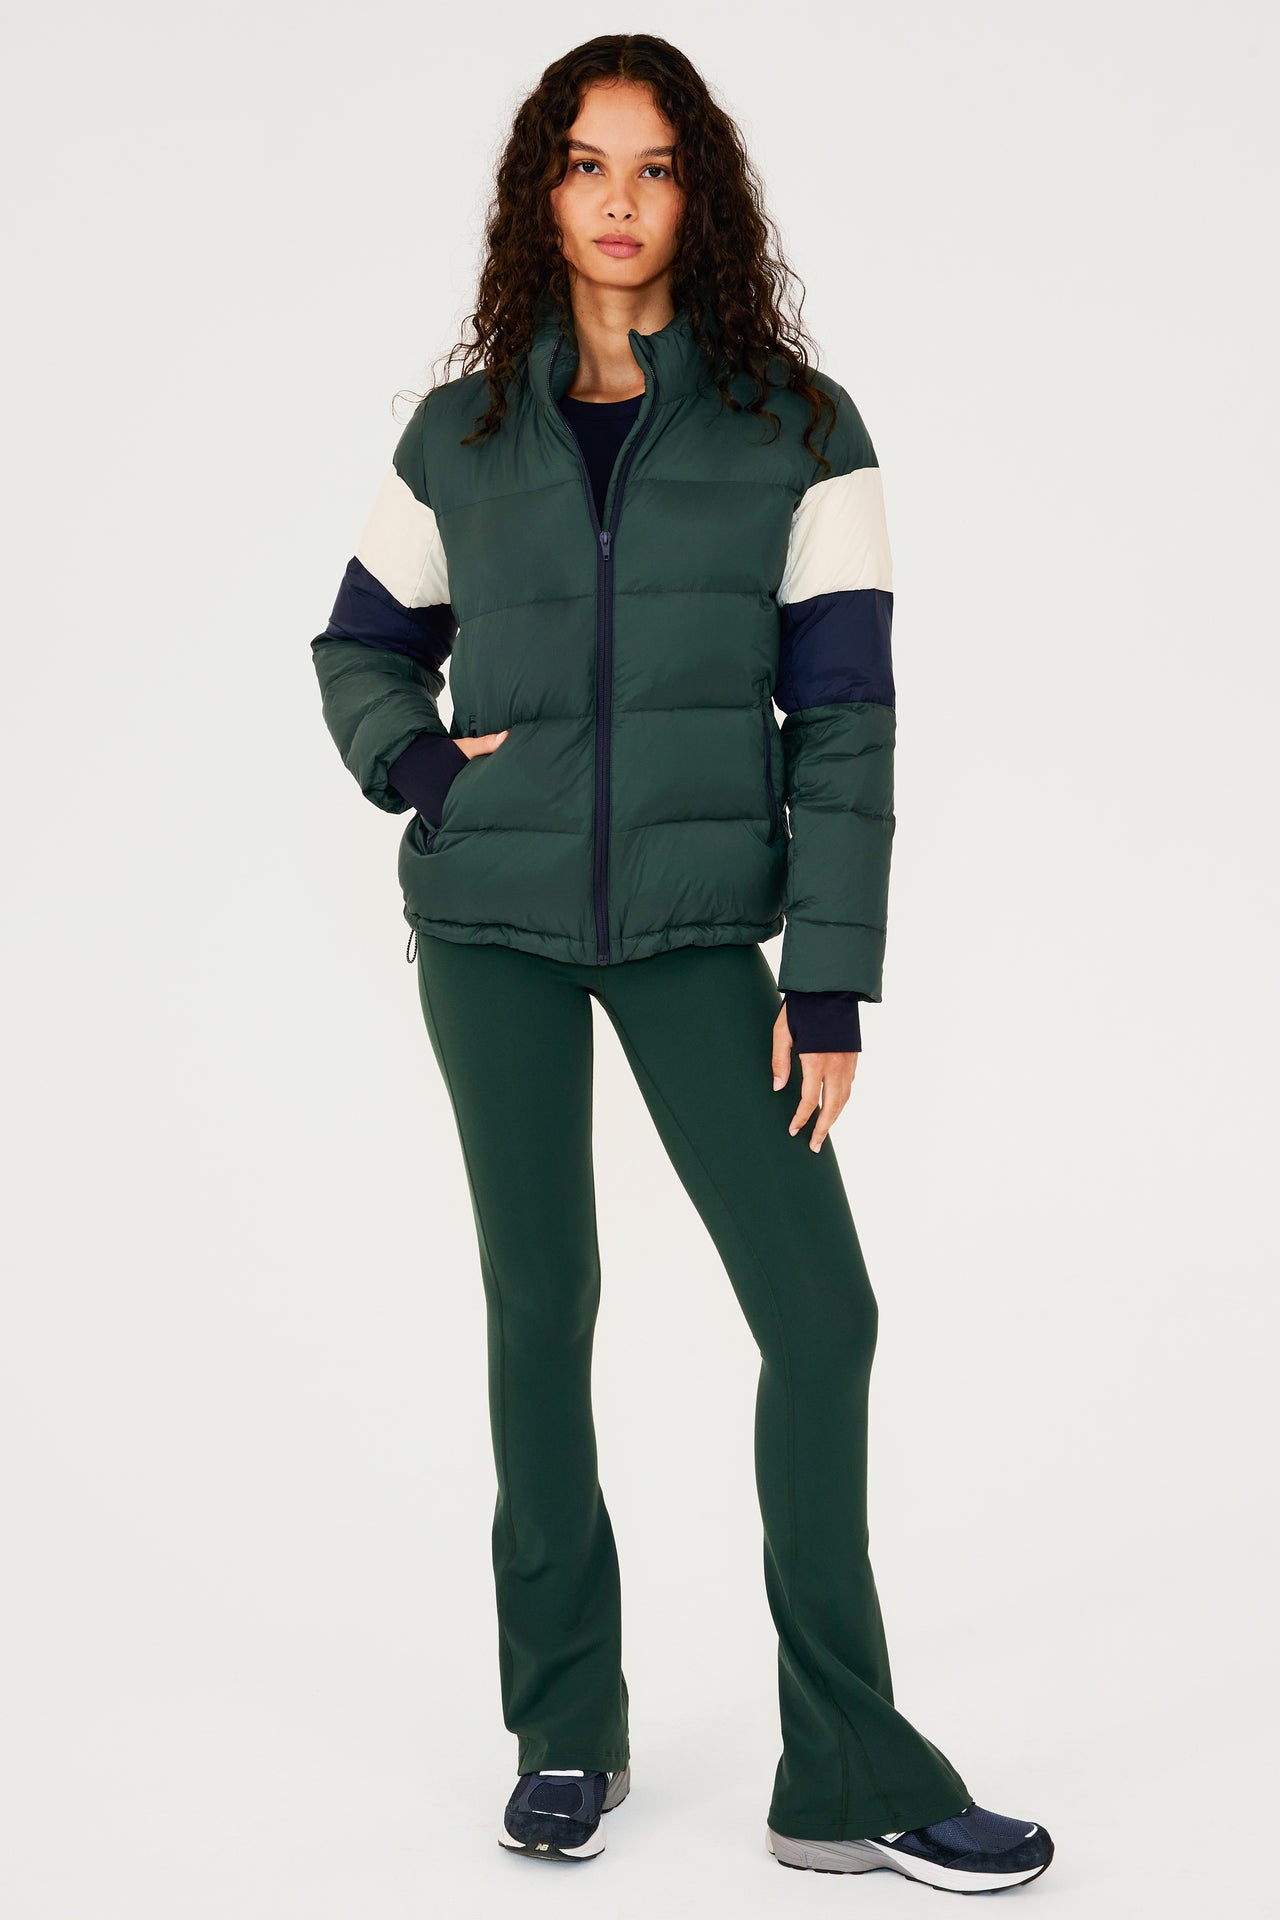 Full front view of girl wearing dark green puffer jacket with blue and white stripes on arms and sleeve cuffs with thumb holes and dark green flared leggings with dark blue shoes